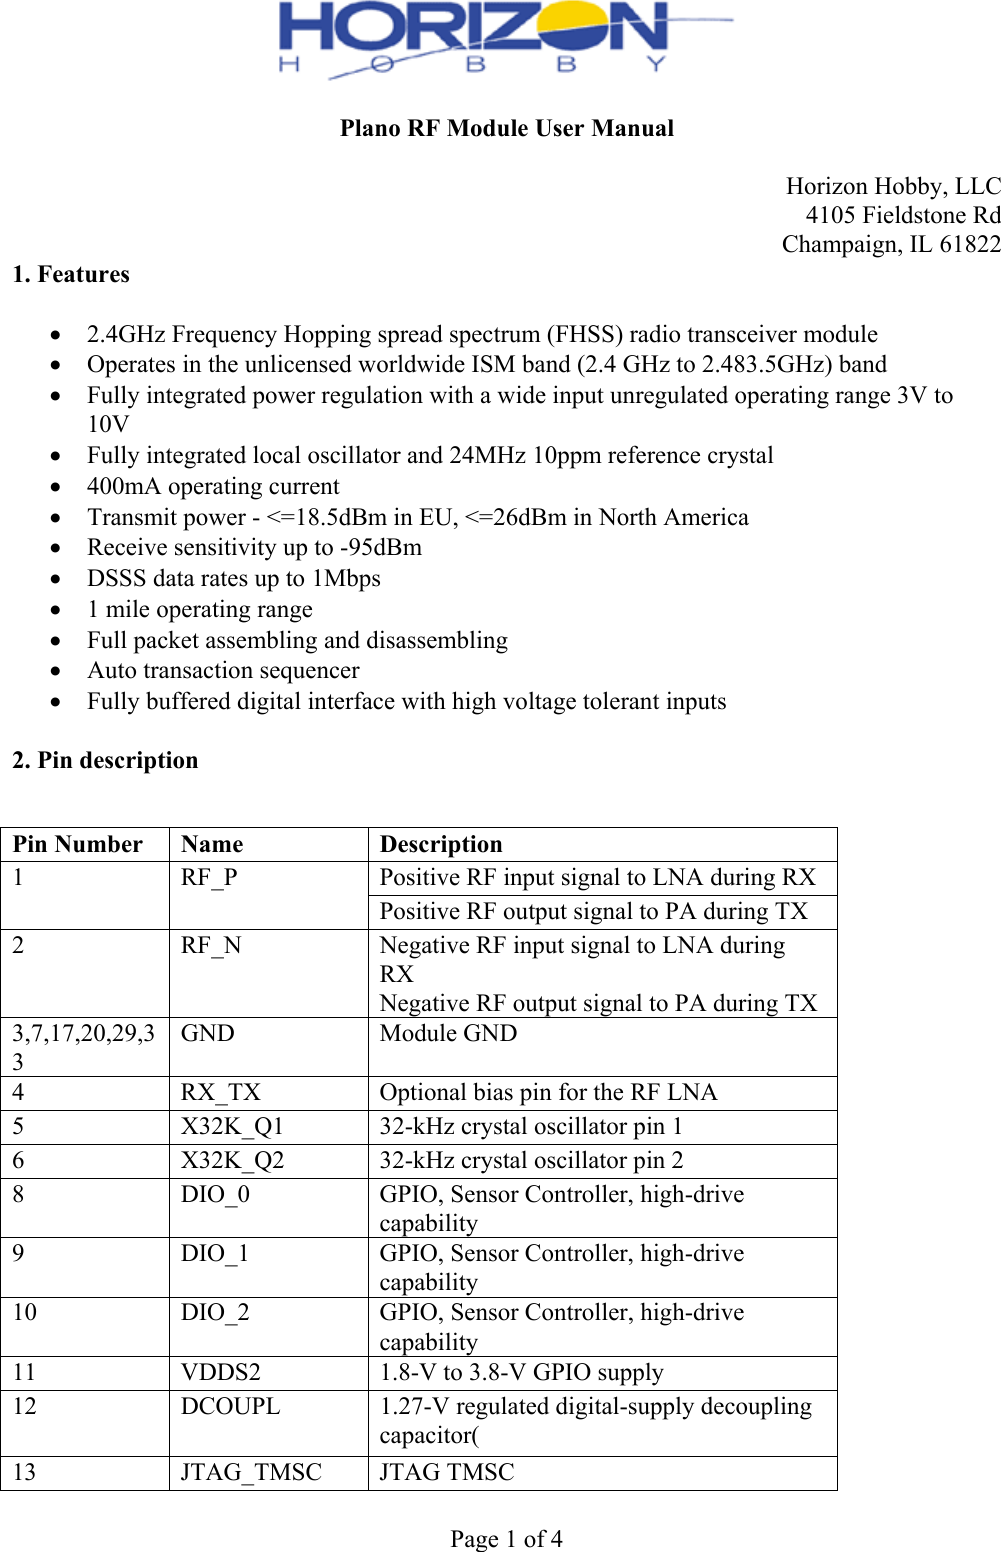  Page 1 of 4  Plano RF Module User Manual  Horizon Hobby, LLC 4105 Fieldstone Rd Champaign, IL 61822 1. Features   2.4GHz Frequency Hopping spread spectrum (FHSS) radio transceiver module  Operates in the unlicensed worldwide ISM band (2.4 GHz to 2.483.5GHz) band  Fully integrated power regulation with a wide input unregulated operating range 3V to 10V  Fully integrated local oscillator and 24MHz 10ppm reference crystal  400mA operating current  Transmit power - &lt;=18.5dBm in EU, &lt;=26dBm in North America  Receive sensitivity up to -95dBm  DSSS data rates up to 1Mbps  1 mile operating range  Full packet assembling and disassembling  Auto transaction sequencer  Fully buffered digital interface with high voltage tolerant inputs  2. Pin description   Pin Number  Name  Description 1  RF_P  Positive RF input signal to LNA during RX Positive RF output signal to PA during TX 2  RF_N  Negative RF input signal to LNA during RX Negative RF output signal to PA during TX 3,7,17,20,29,33 GND  Module GND 4  RX_TX  Optional bias pin for the RF LNA 5  X32K_Q1  32-kHz crystal oscillator pin 1 6  X32K_Q2  32-kHz crystal oscillator pin 2 8  DIO_0  GPIO, Sensor Controller, high-drive capability 9  DIO_1  GPIO, Sensor Controller, high-drive capability 10  DIO_2  GPIO, Sensor Controller, high-drive capability 11  VDDS2  1.8-V to 3.8-V GPIO supply 12  DCOUPL  1.27-V regulated digital-supply decoupling capacitor( 13  JTAG_TMSC  JTAG TMSC 